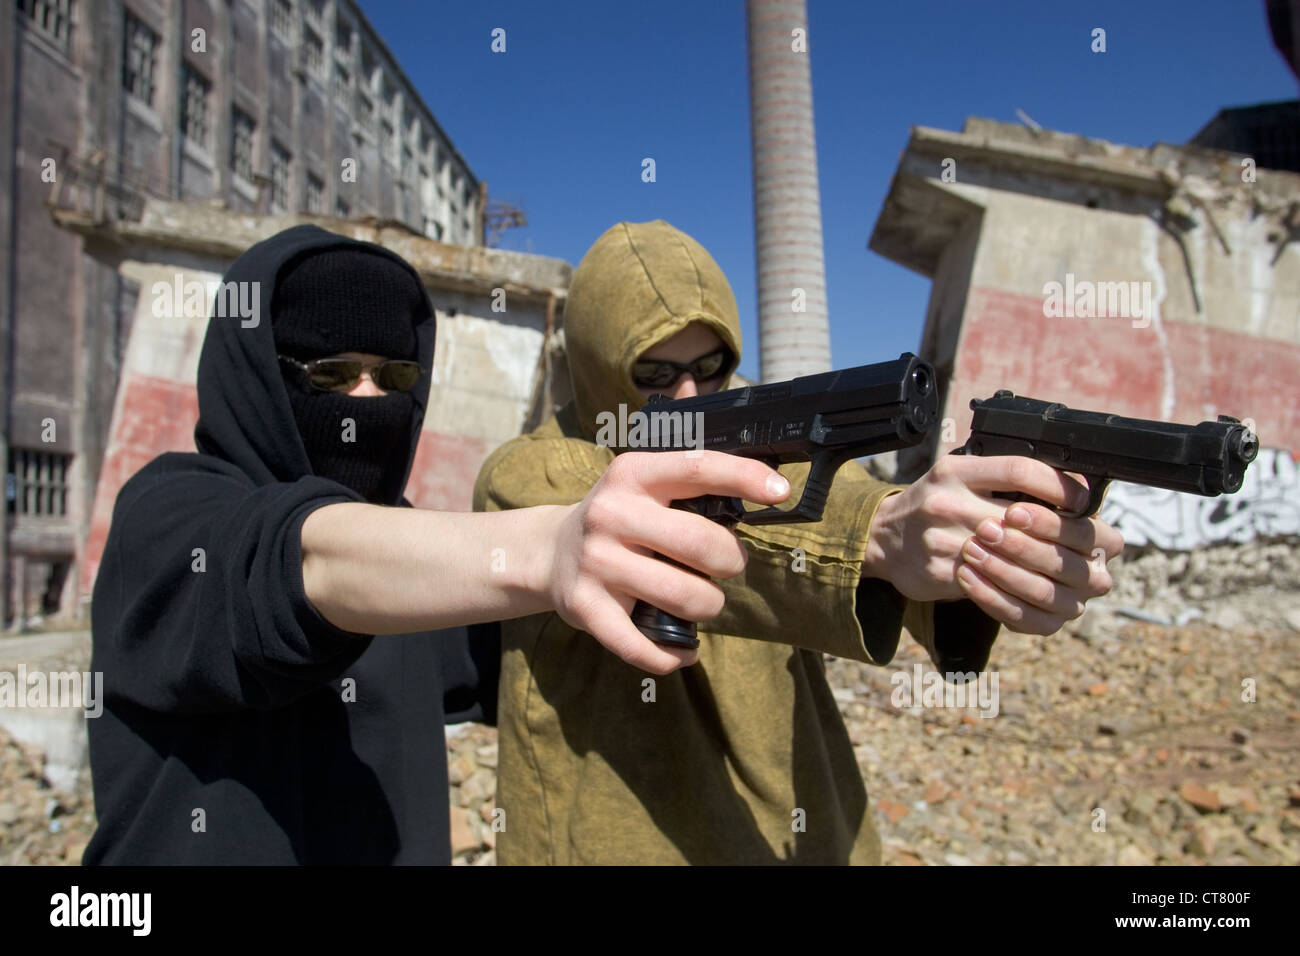 Two teenagers aim their weapons Stock Photo